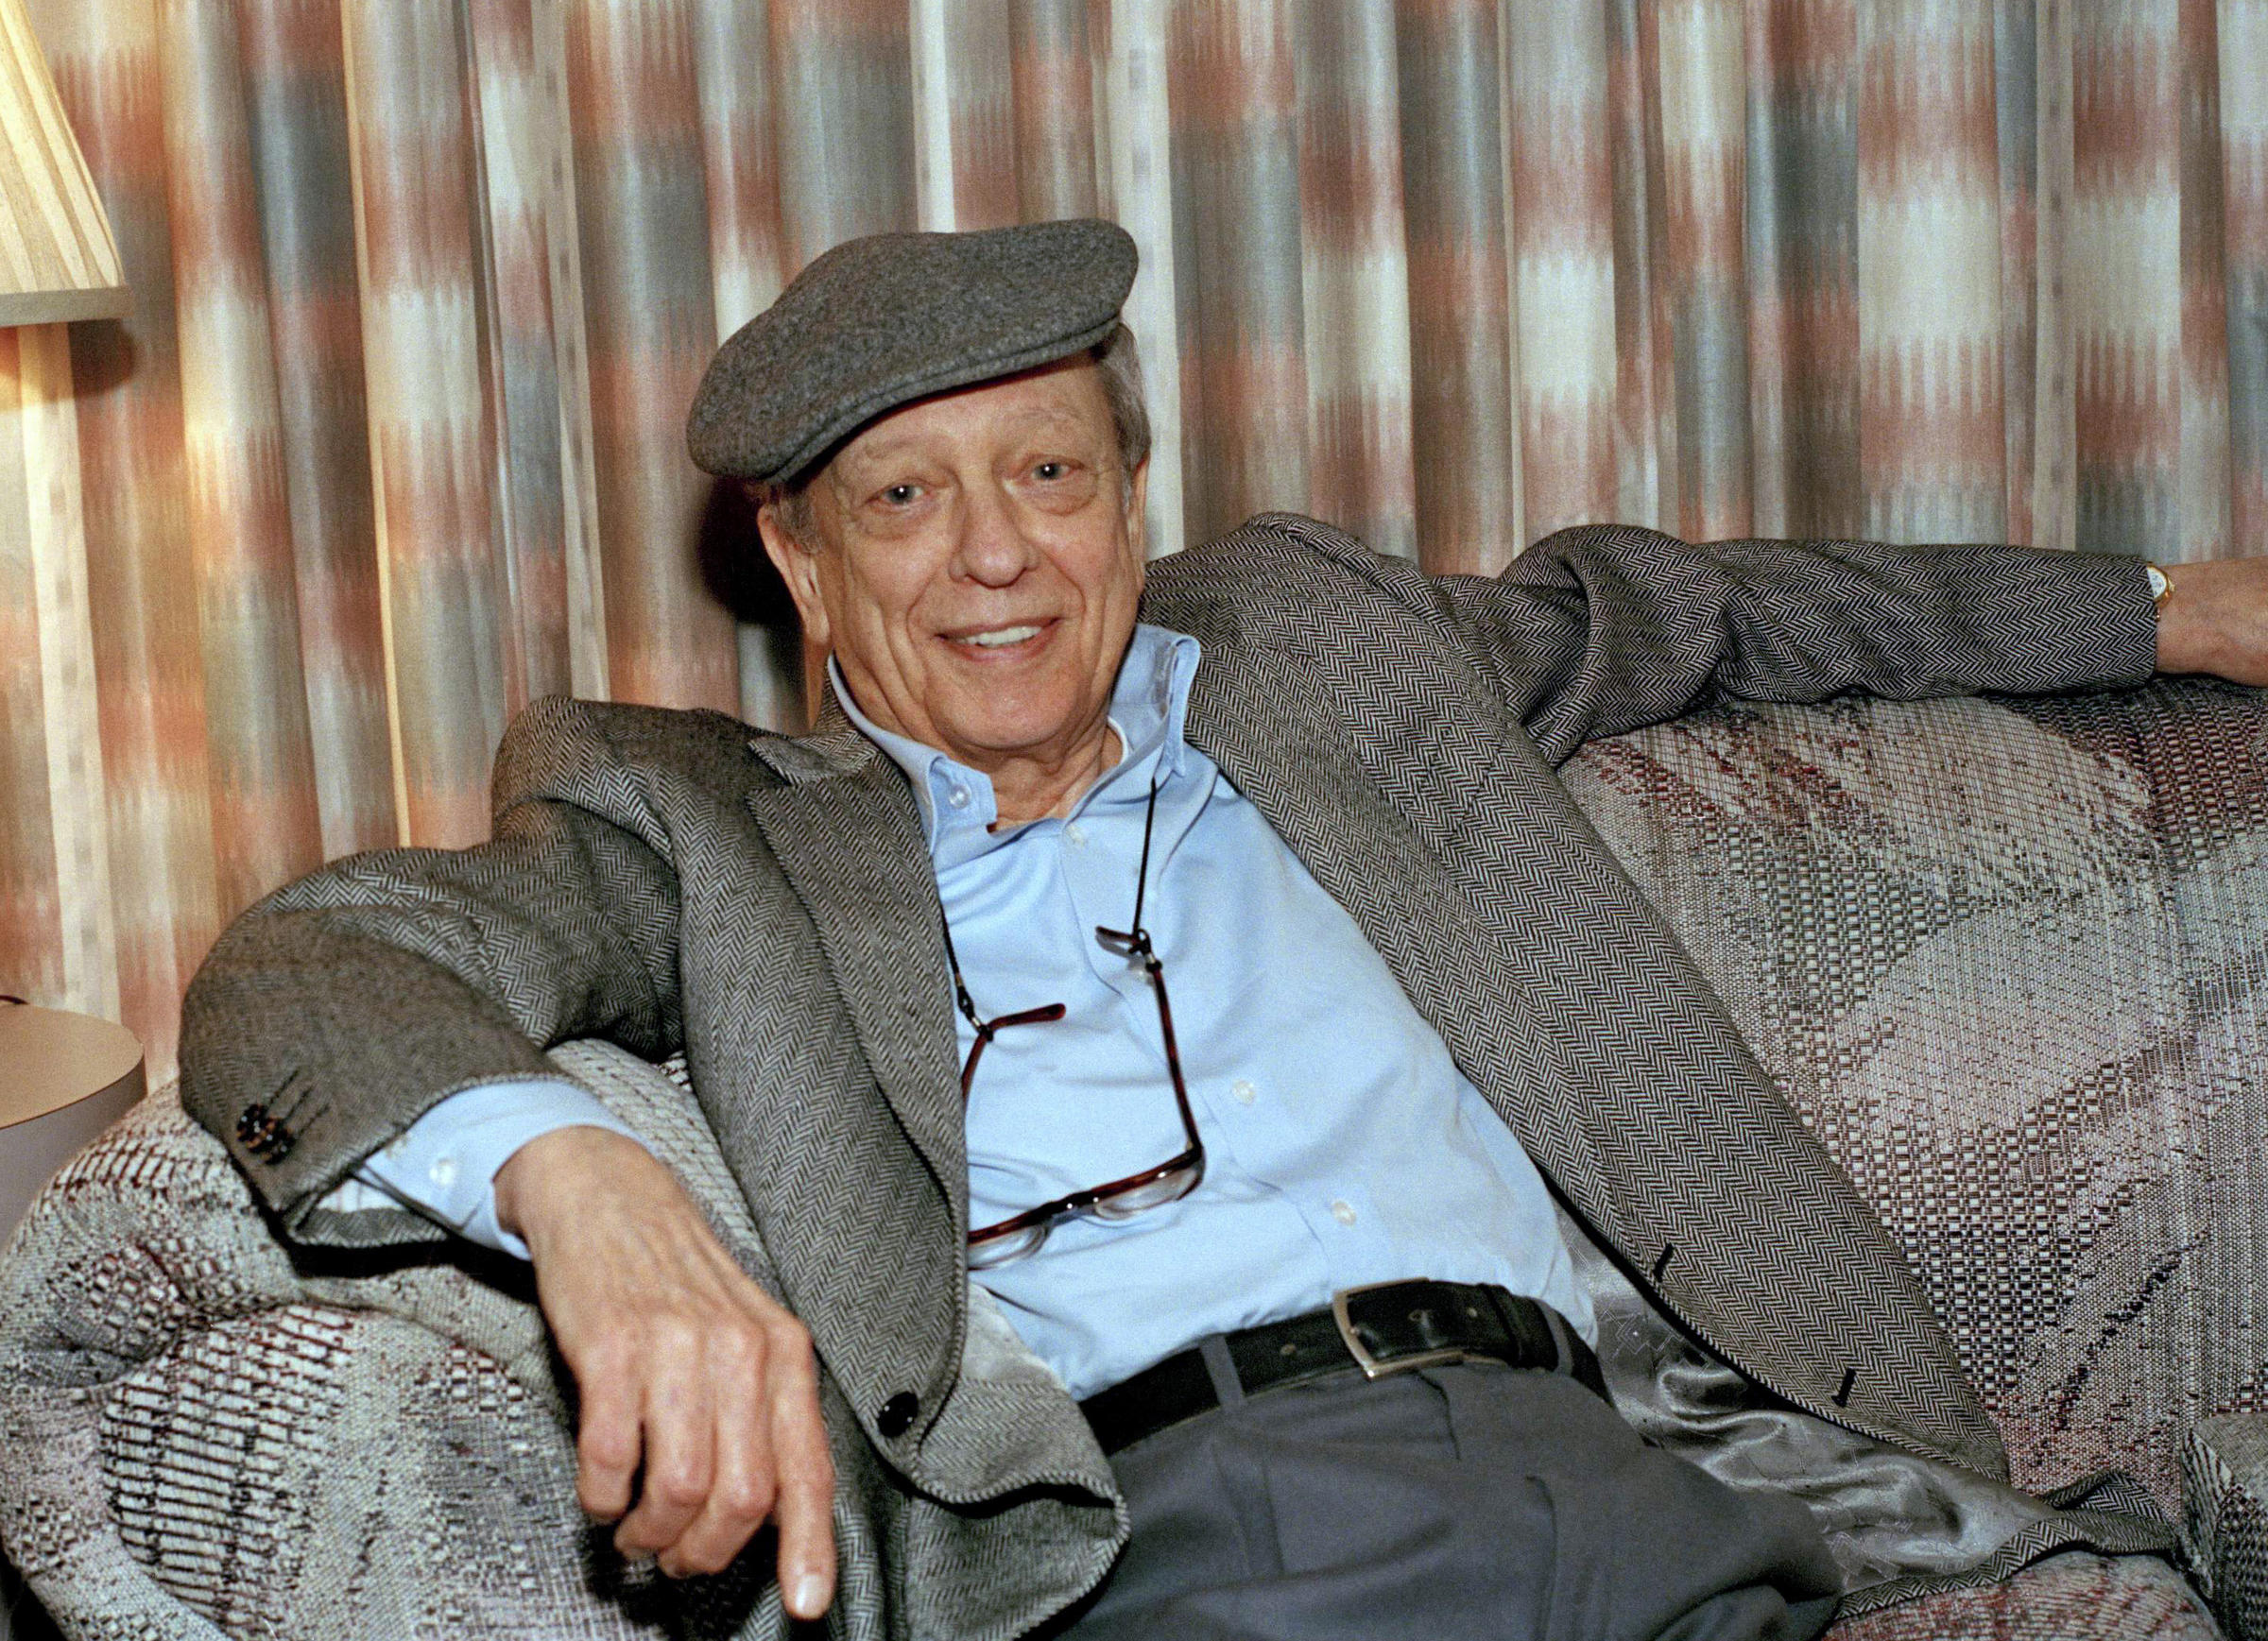 Don knotts height and weight